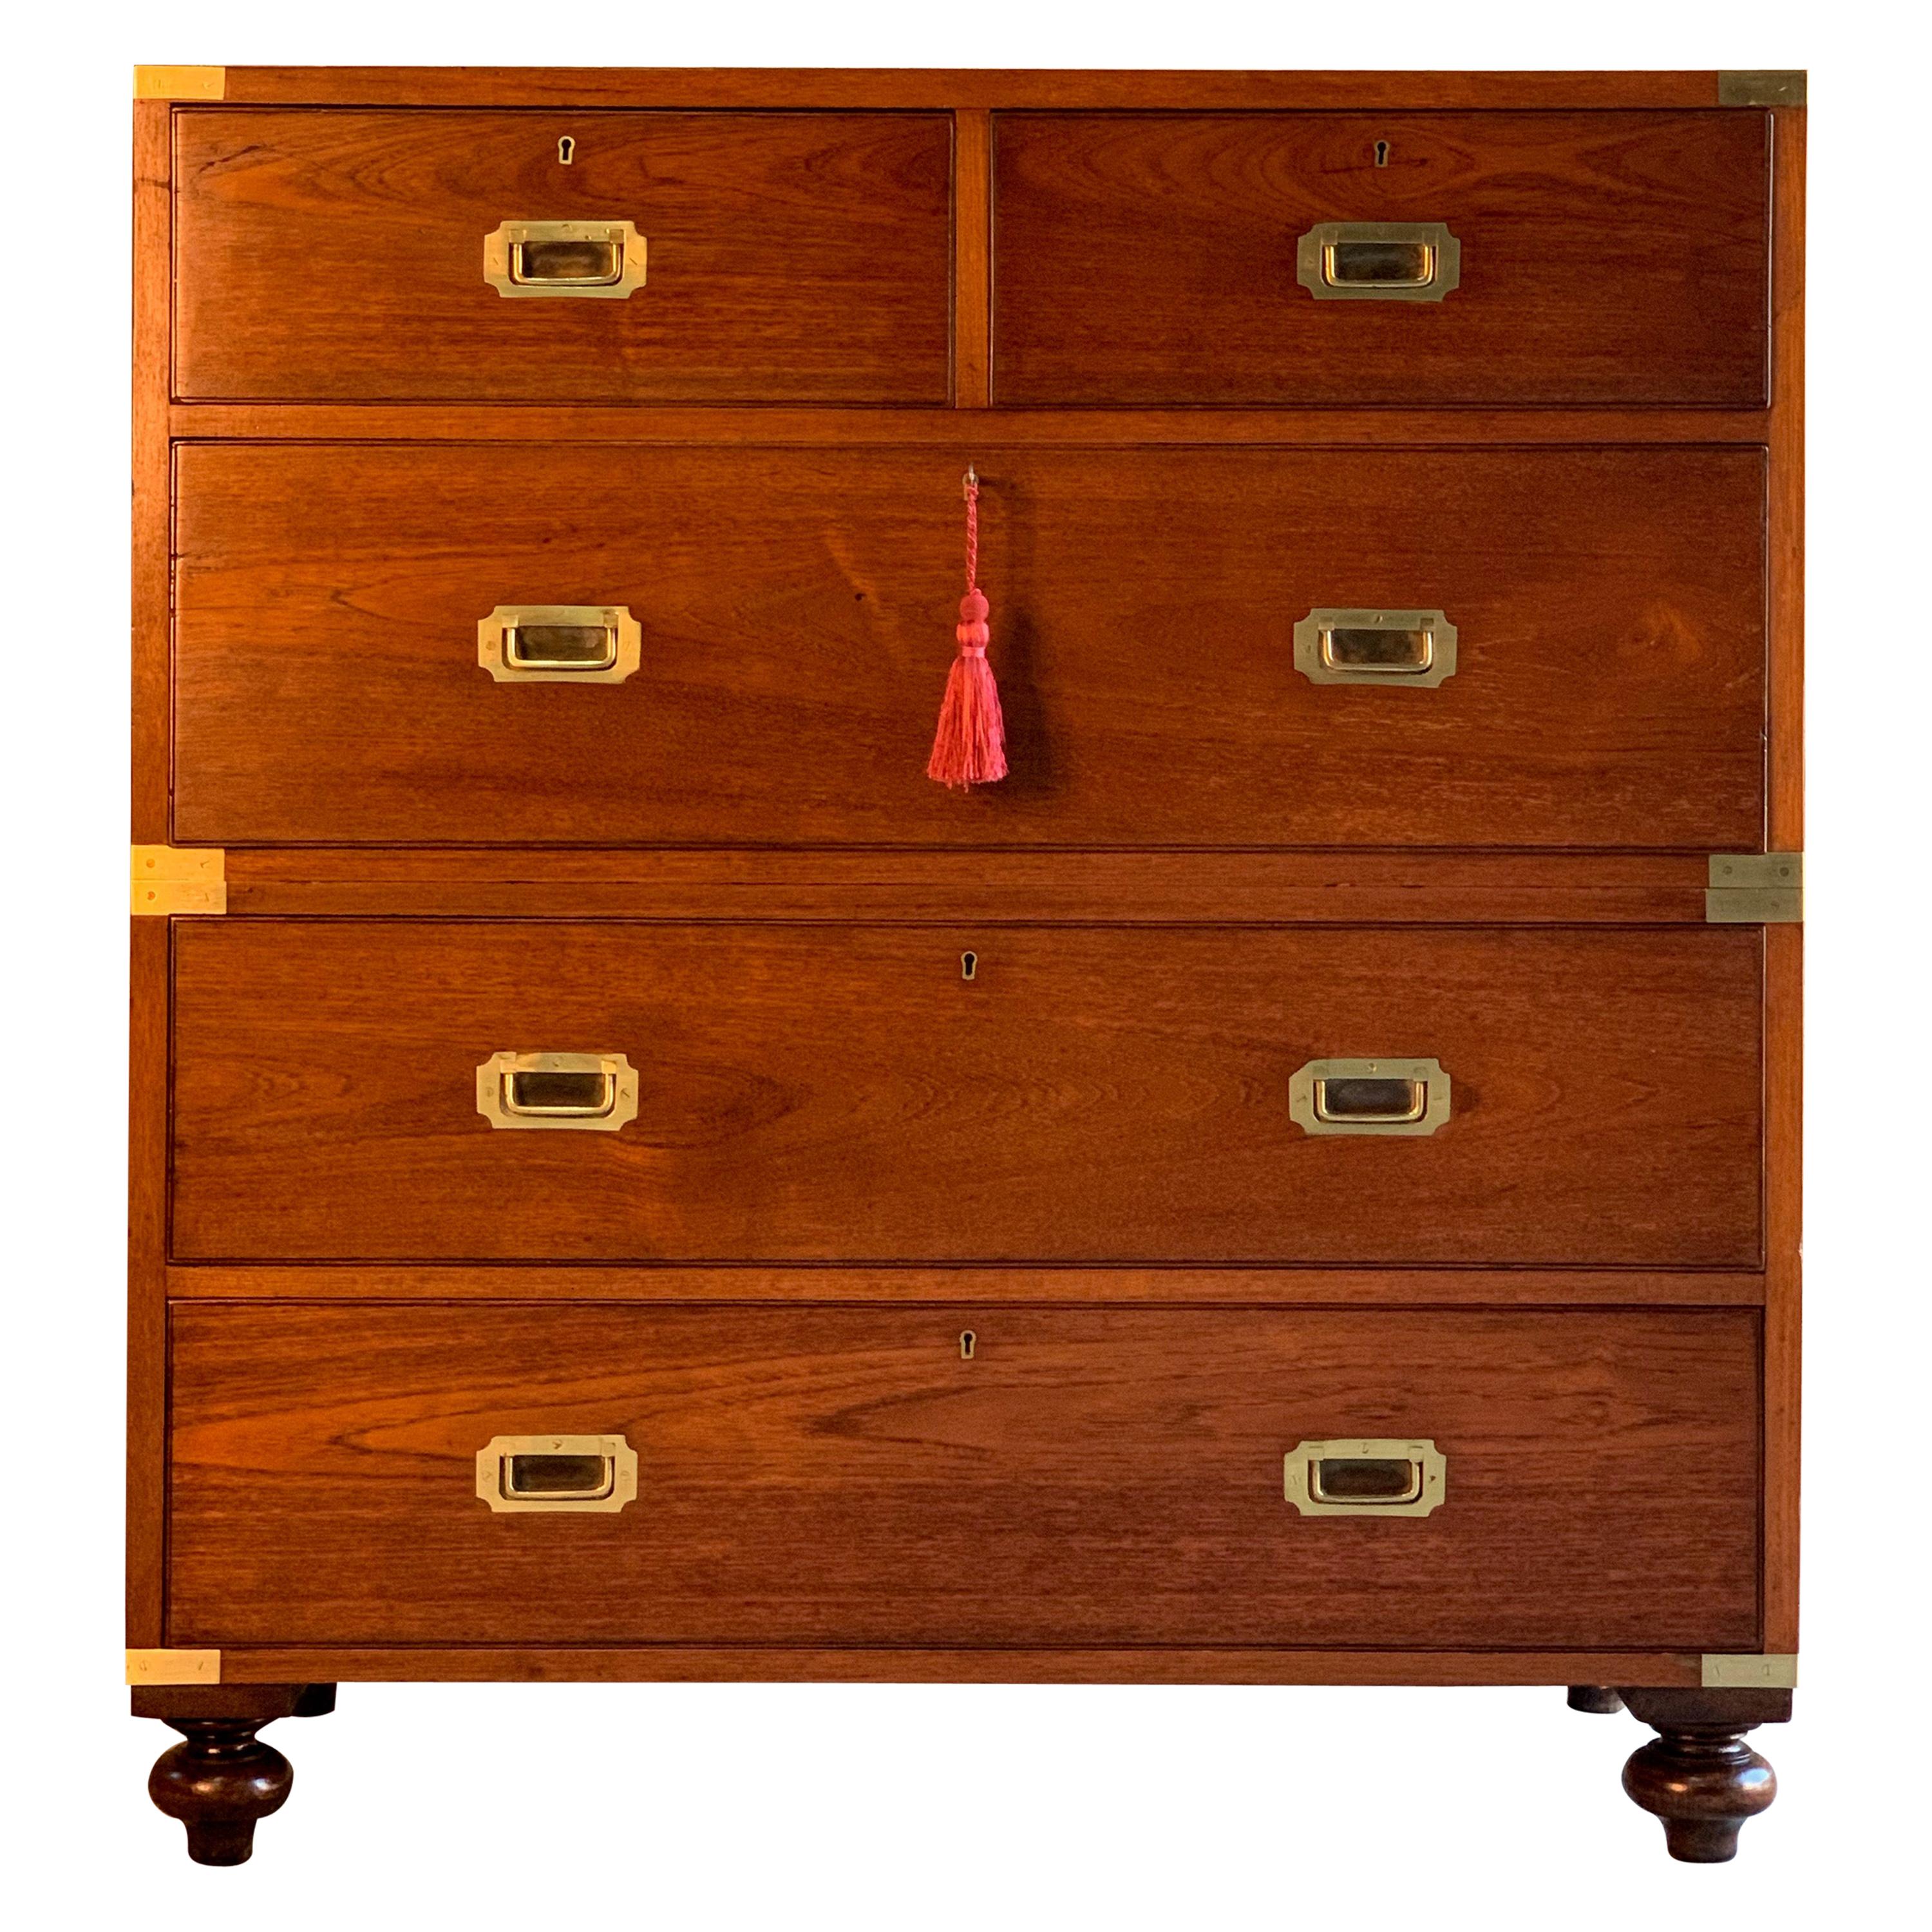 Teak Military Campaign Chest of Drawers Victorian, circa 1890 Number 28